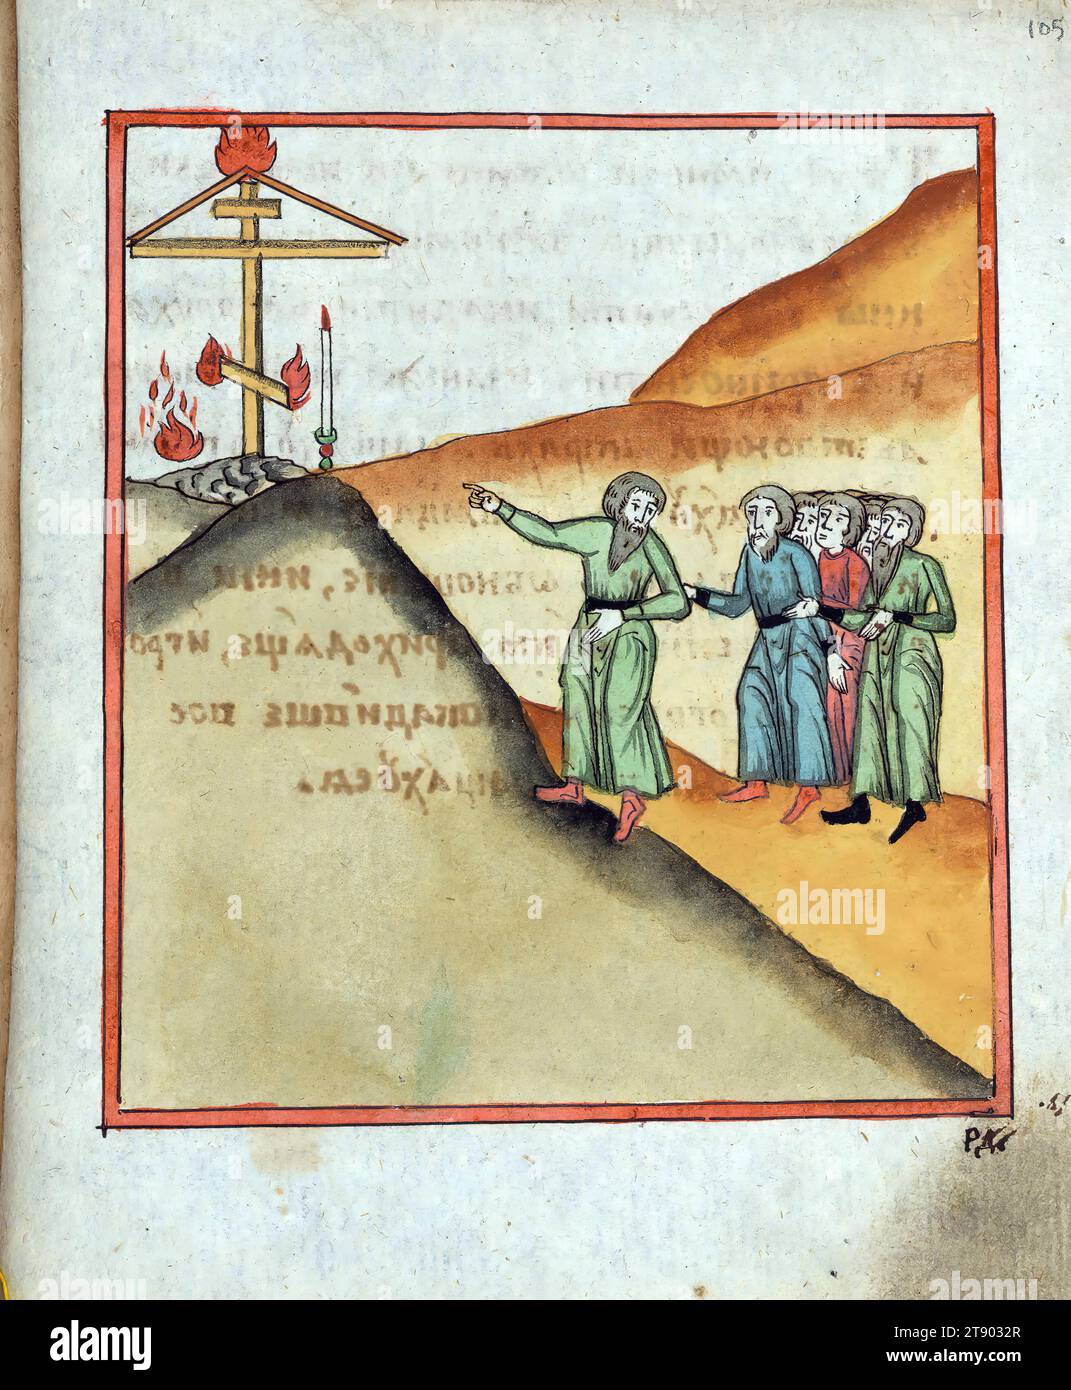 Fathers of the Solovetsky Monastery and their sufferings, Monks see liturgical objects with flames, This manuscript was made around 1800 by an often persecuted group of Russian Christians, the 'Old Believers.' Because this group frequently had its books confiscated and was denied the use of printing presses, its members continued to write important books such as this one by hand Stock Photo